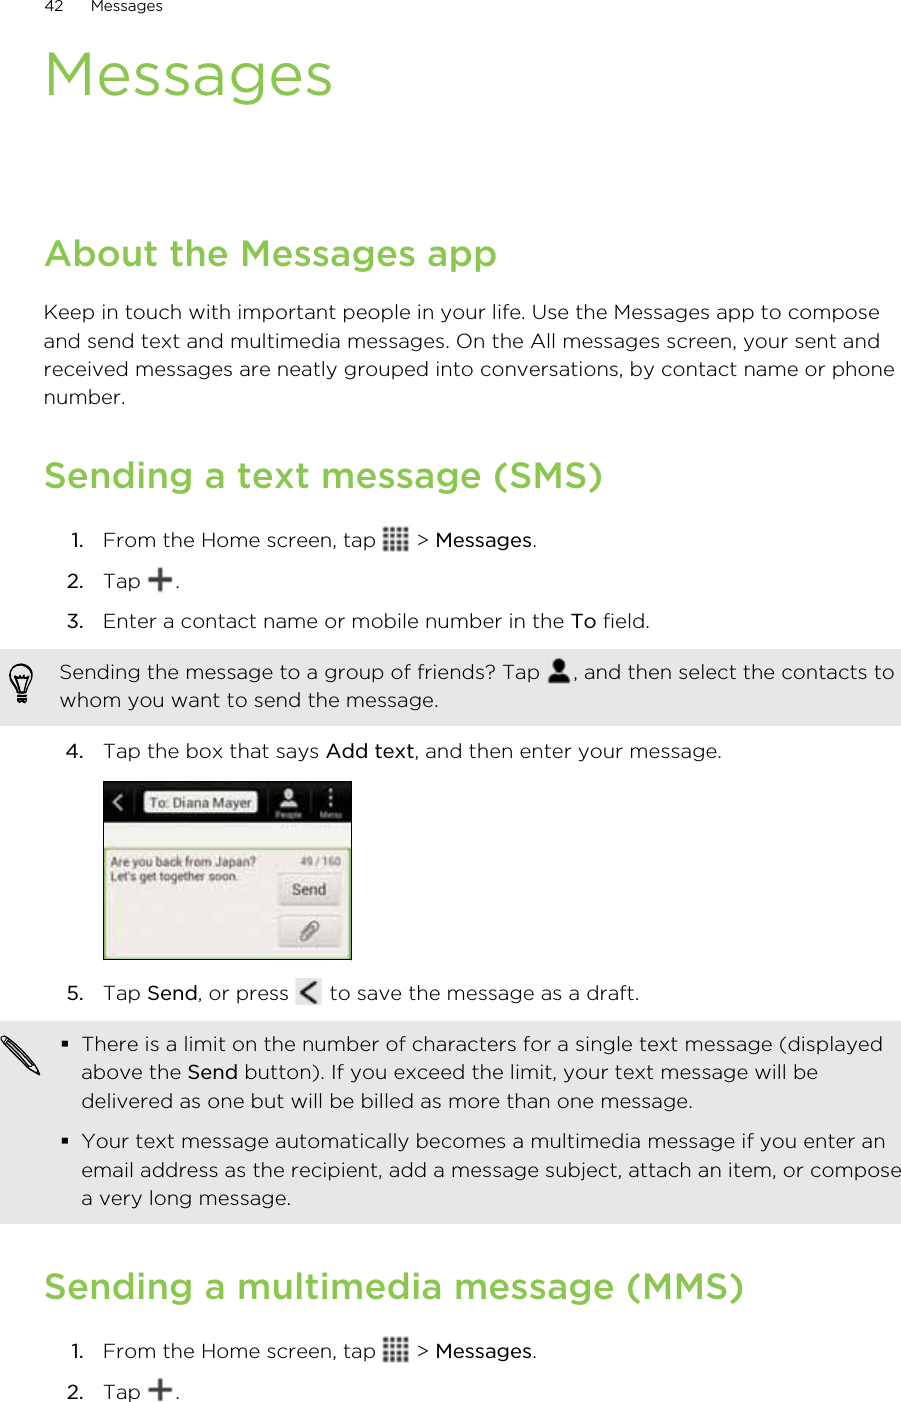 MessagesAbout the Messages appKeep in touch with important people in your life. Use the Messages app to composeand send text and multimedia messages. On the All messages screen, your sent andreceived messages are neatly grouped into conversations, by contact name or phonenumber.Sending a text message (SMS)1. From the Home screen, tap   &gt; Messages.2. Tap  .3. Enter a contact name or mobile number in the To field. Sending the message to a group of friends? Tap  , and then select the contacts towhom you want to send the message.4. Tap the box that says Add text, and then enter your message. 5. Tap Send, or press   to save the message as a draft. There is a limit on the number of characters for a single text message (displayedabove the Send button). If you exceed the limit, your text message will bedelivered as one but will be billed as more than one message.Your text message automatically becomes a multimedia message if you enter anemail address as the recipient, add a message subject, attach an item, or composea very long message.Sending a multimedia message (MMS)1. From the Home screen, tap   &gt; Messages.2. Tap  .42 Messages